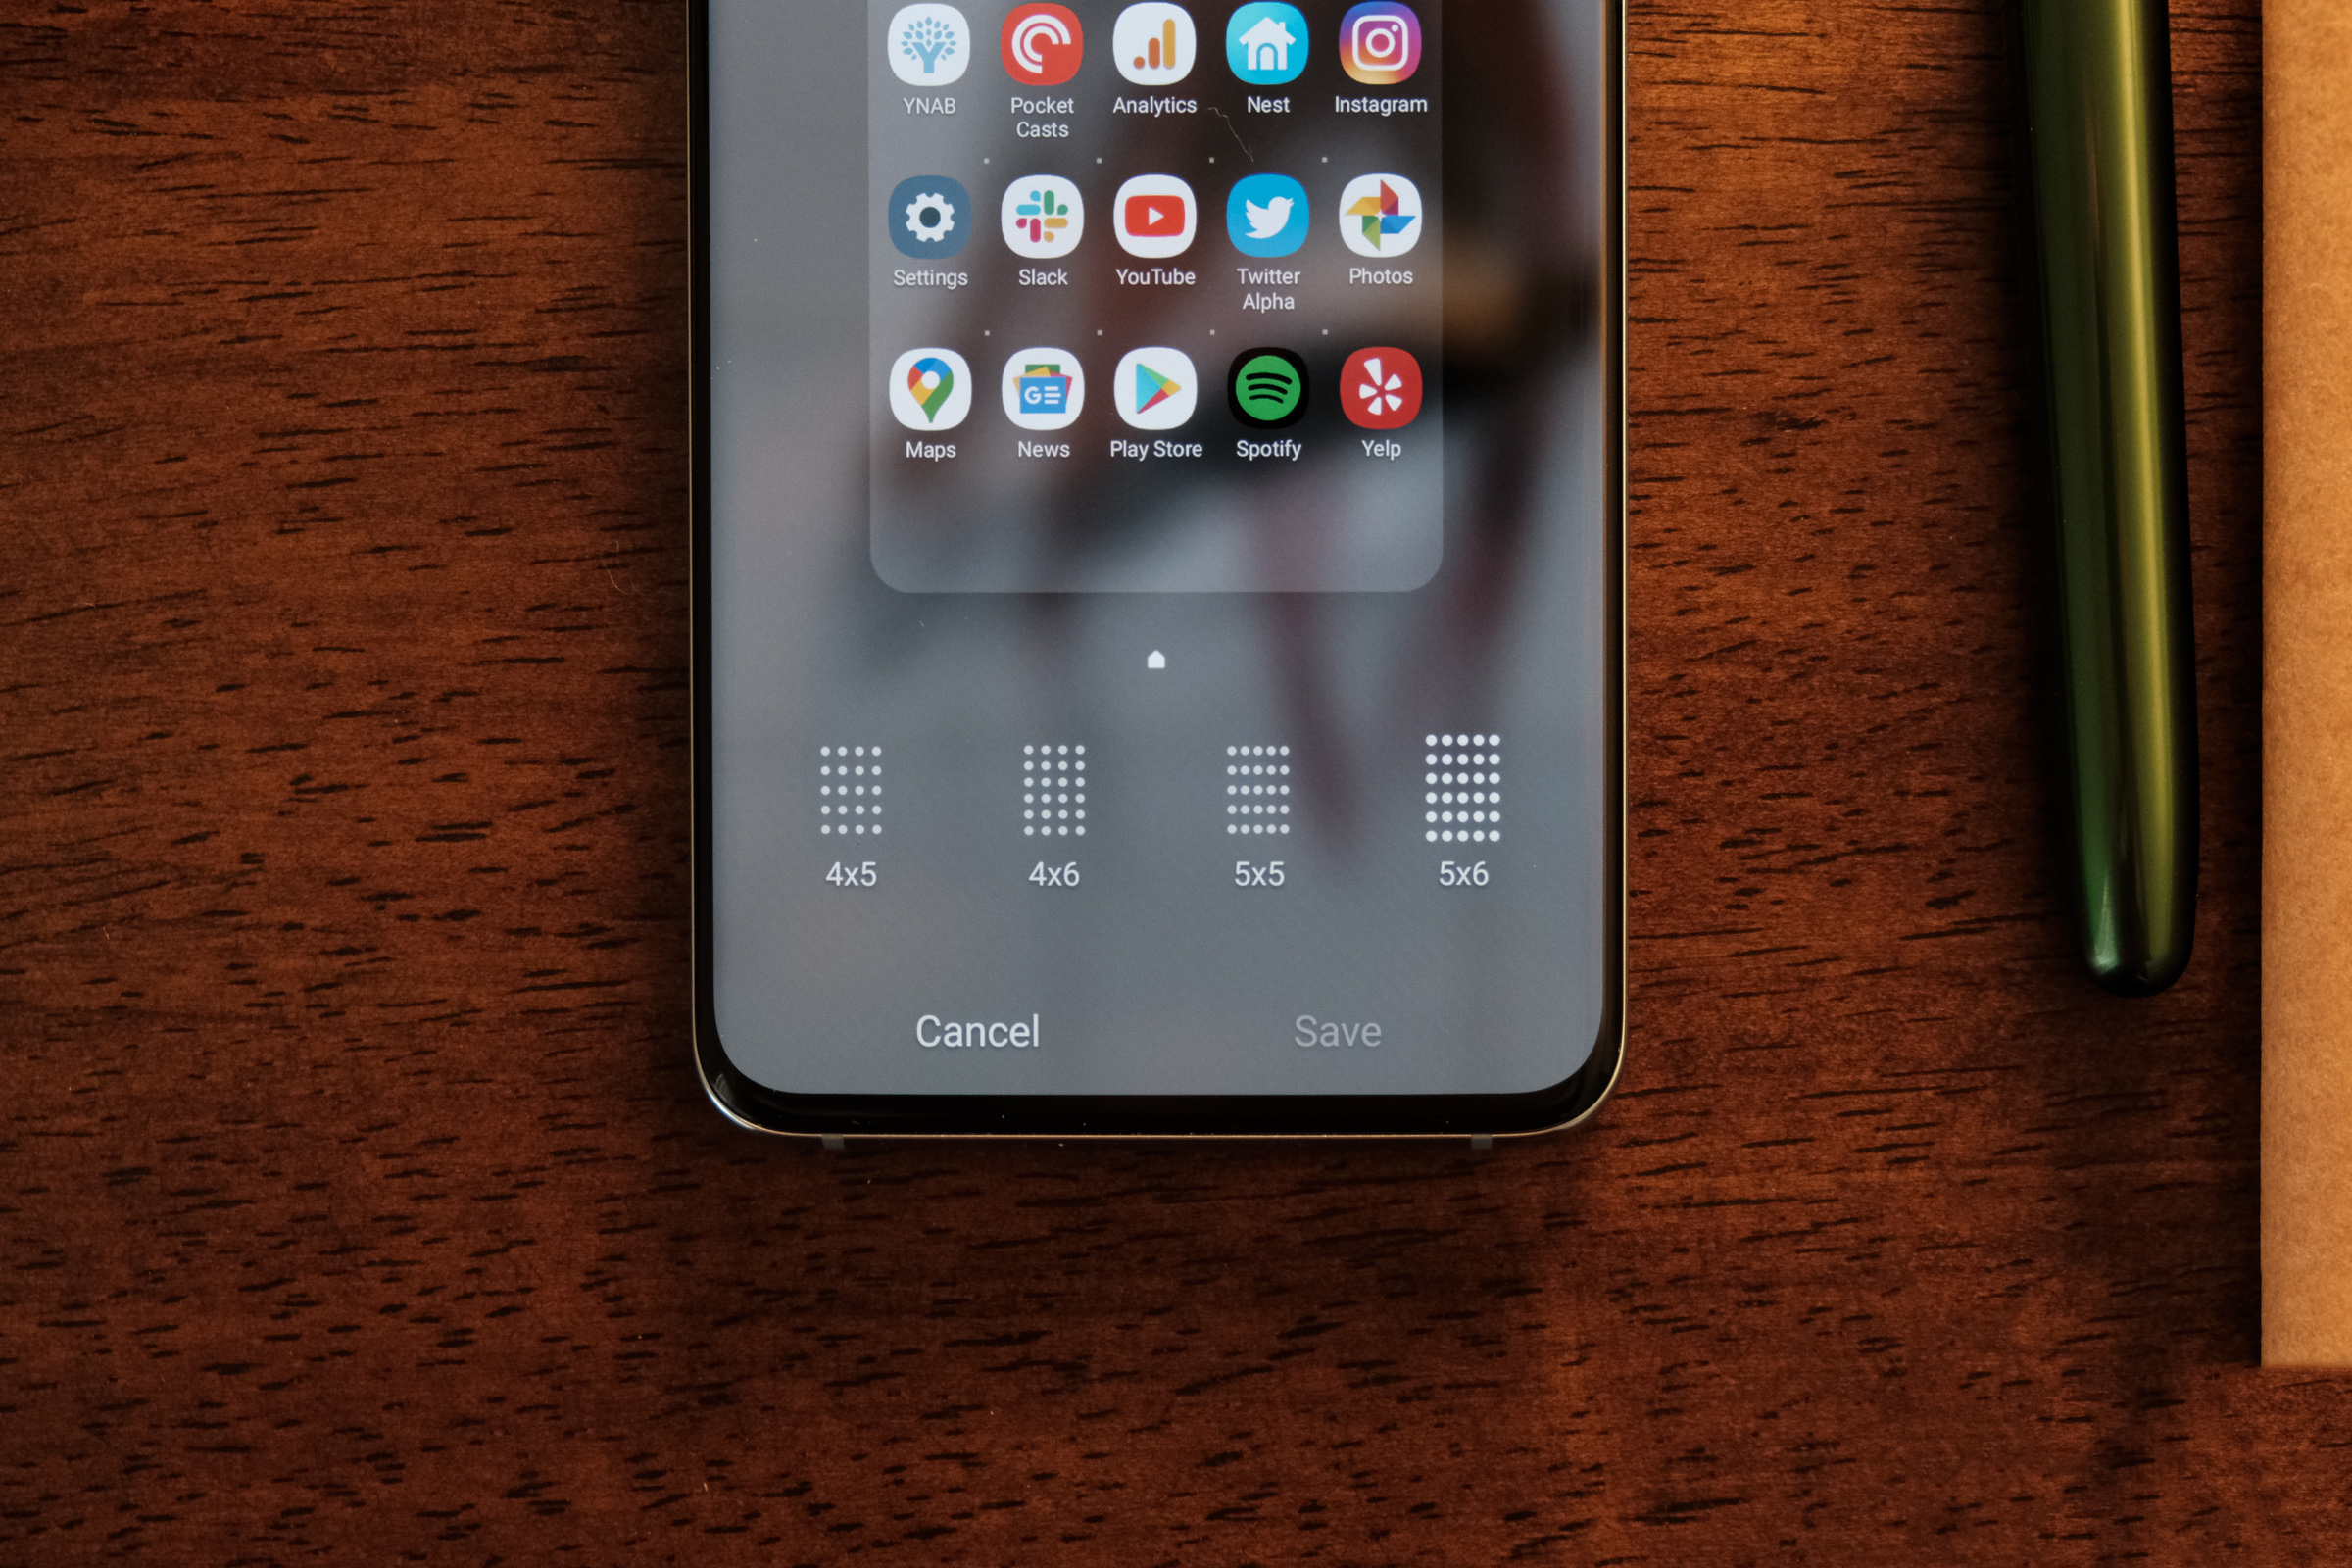 Expand home screen and app drawer icon grid